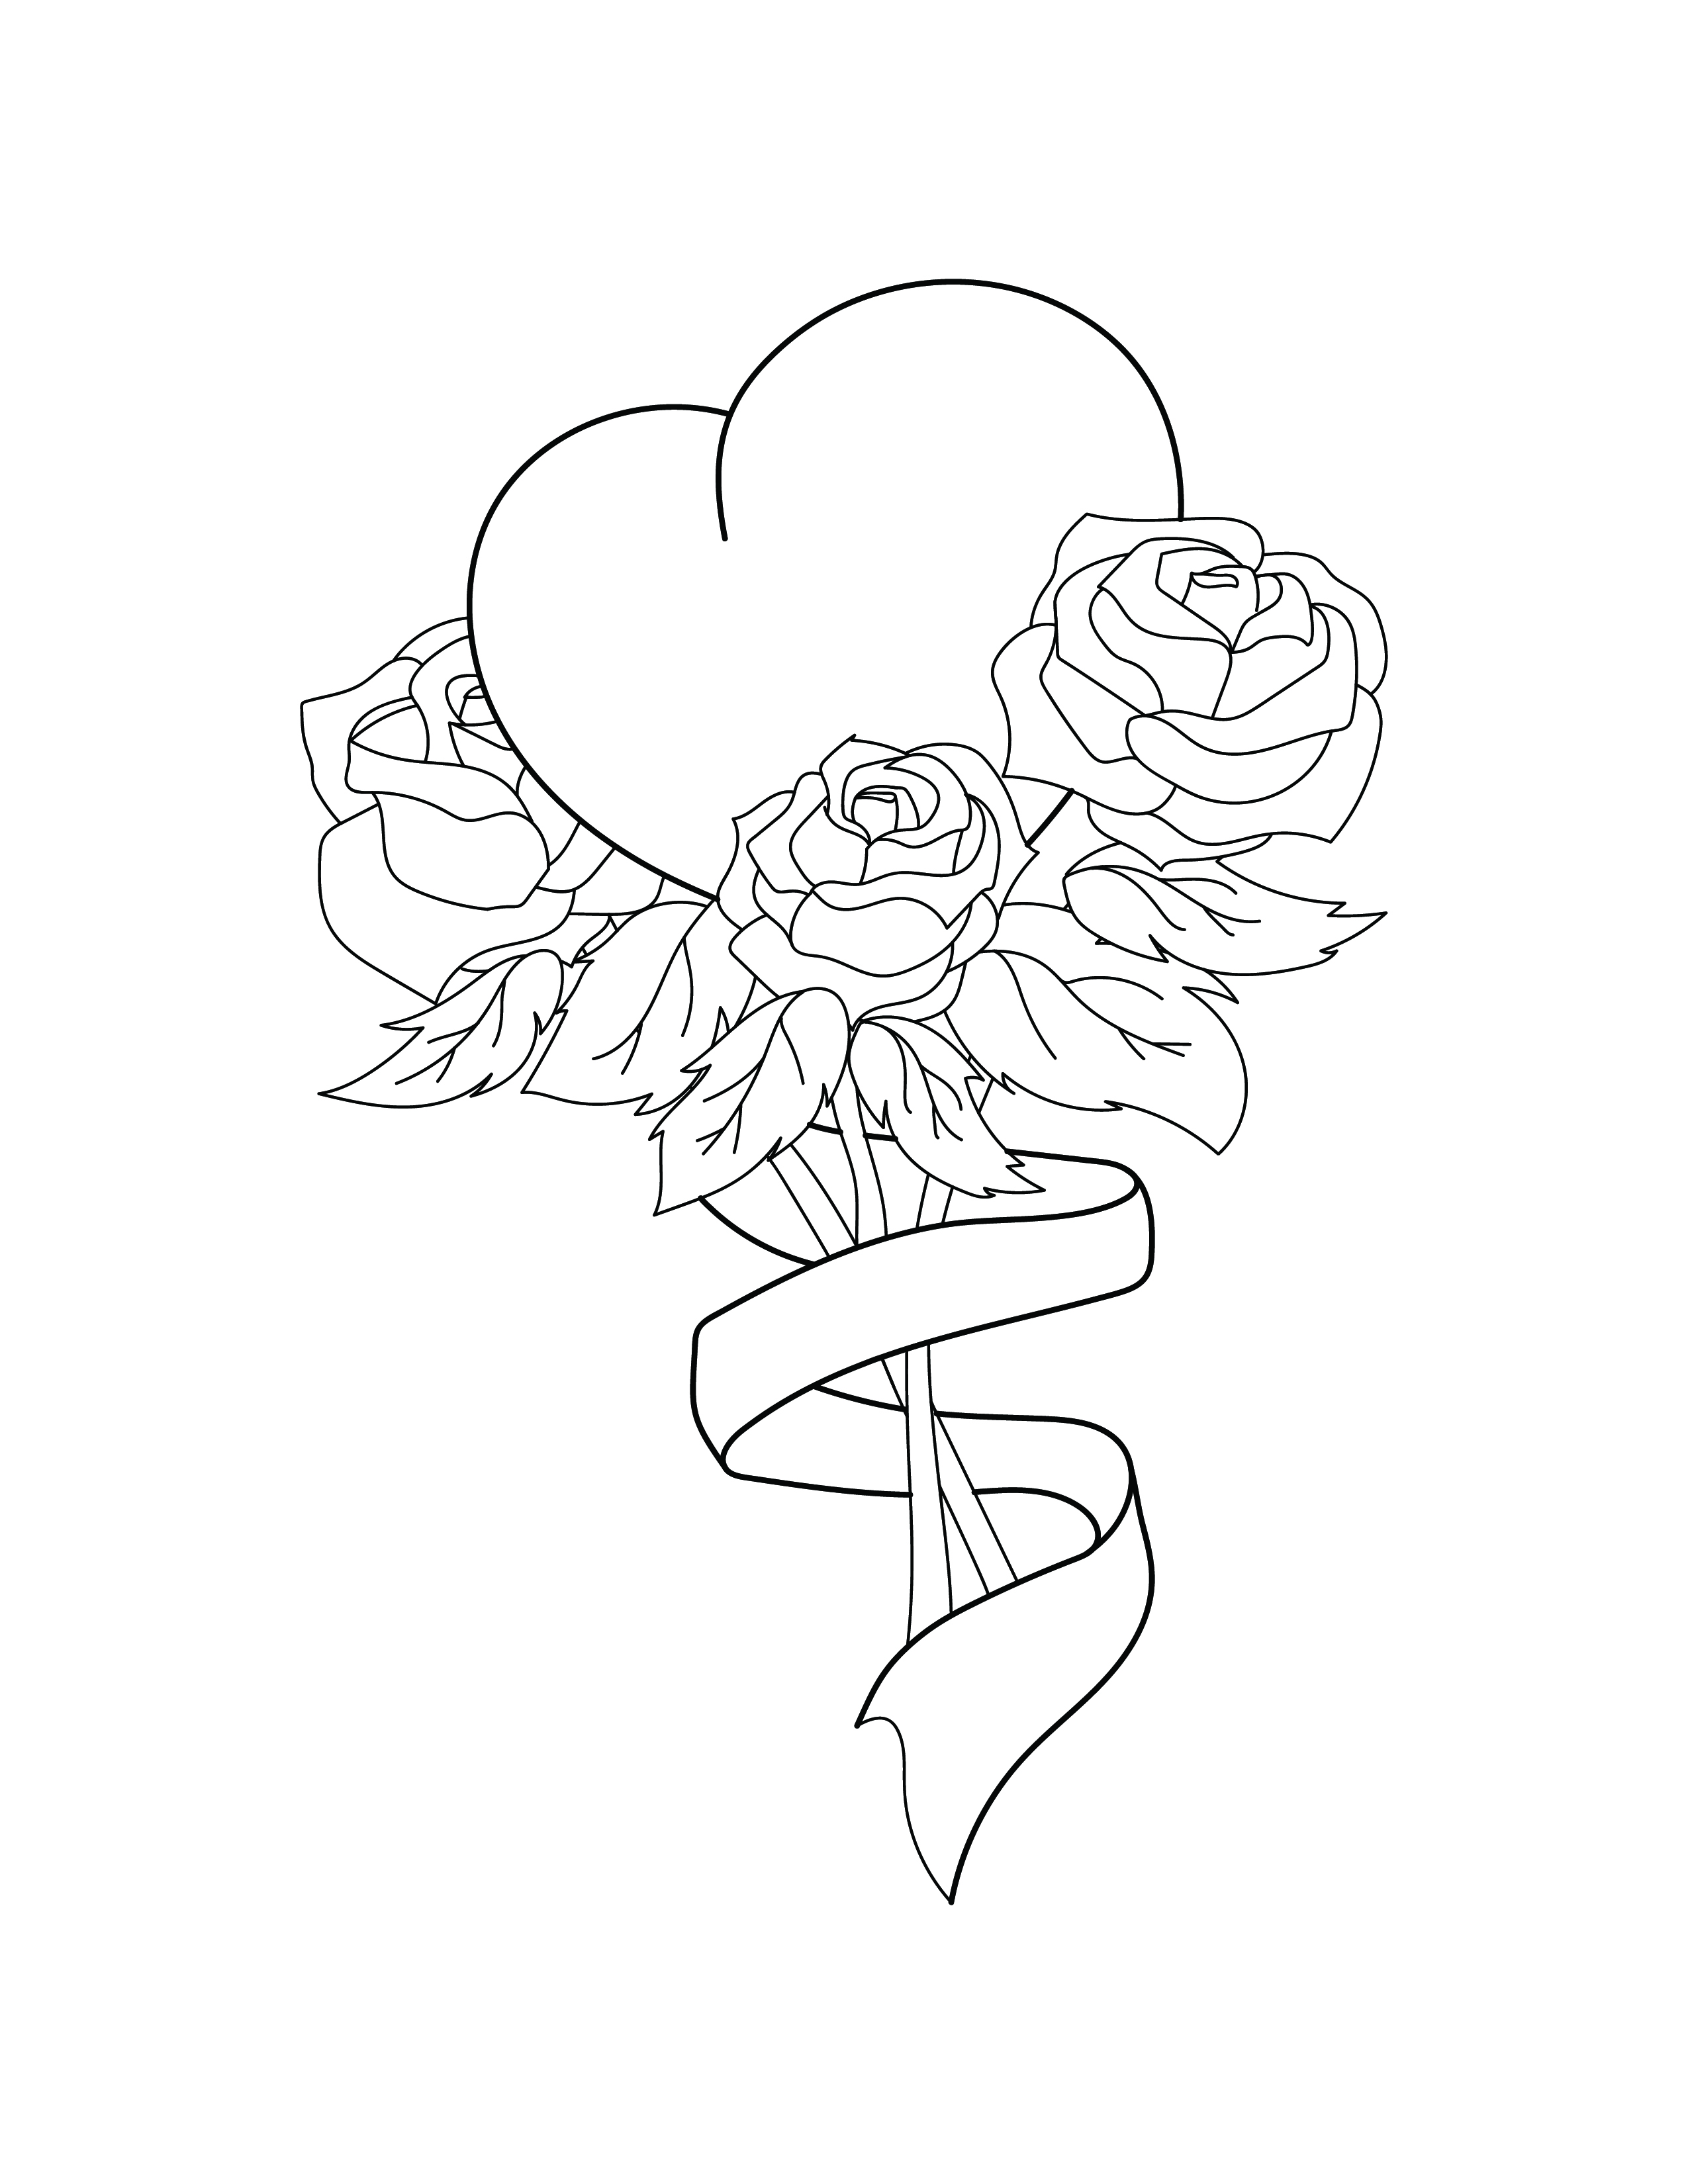 Free Heart Shaped Rose Coloring Page - Download in PDF, Illustrator ...